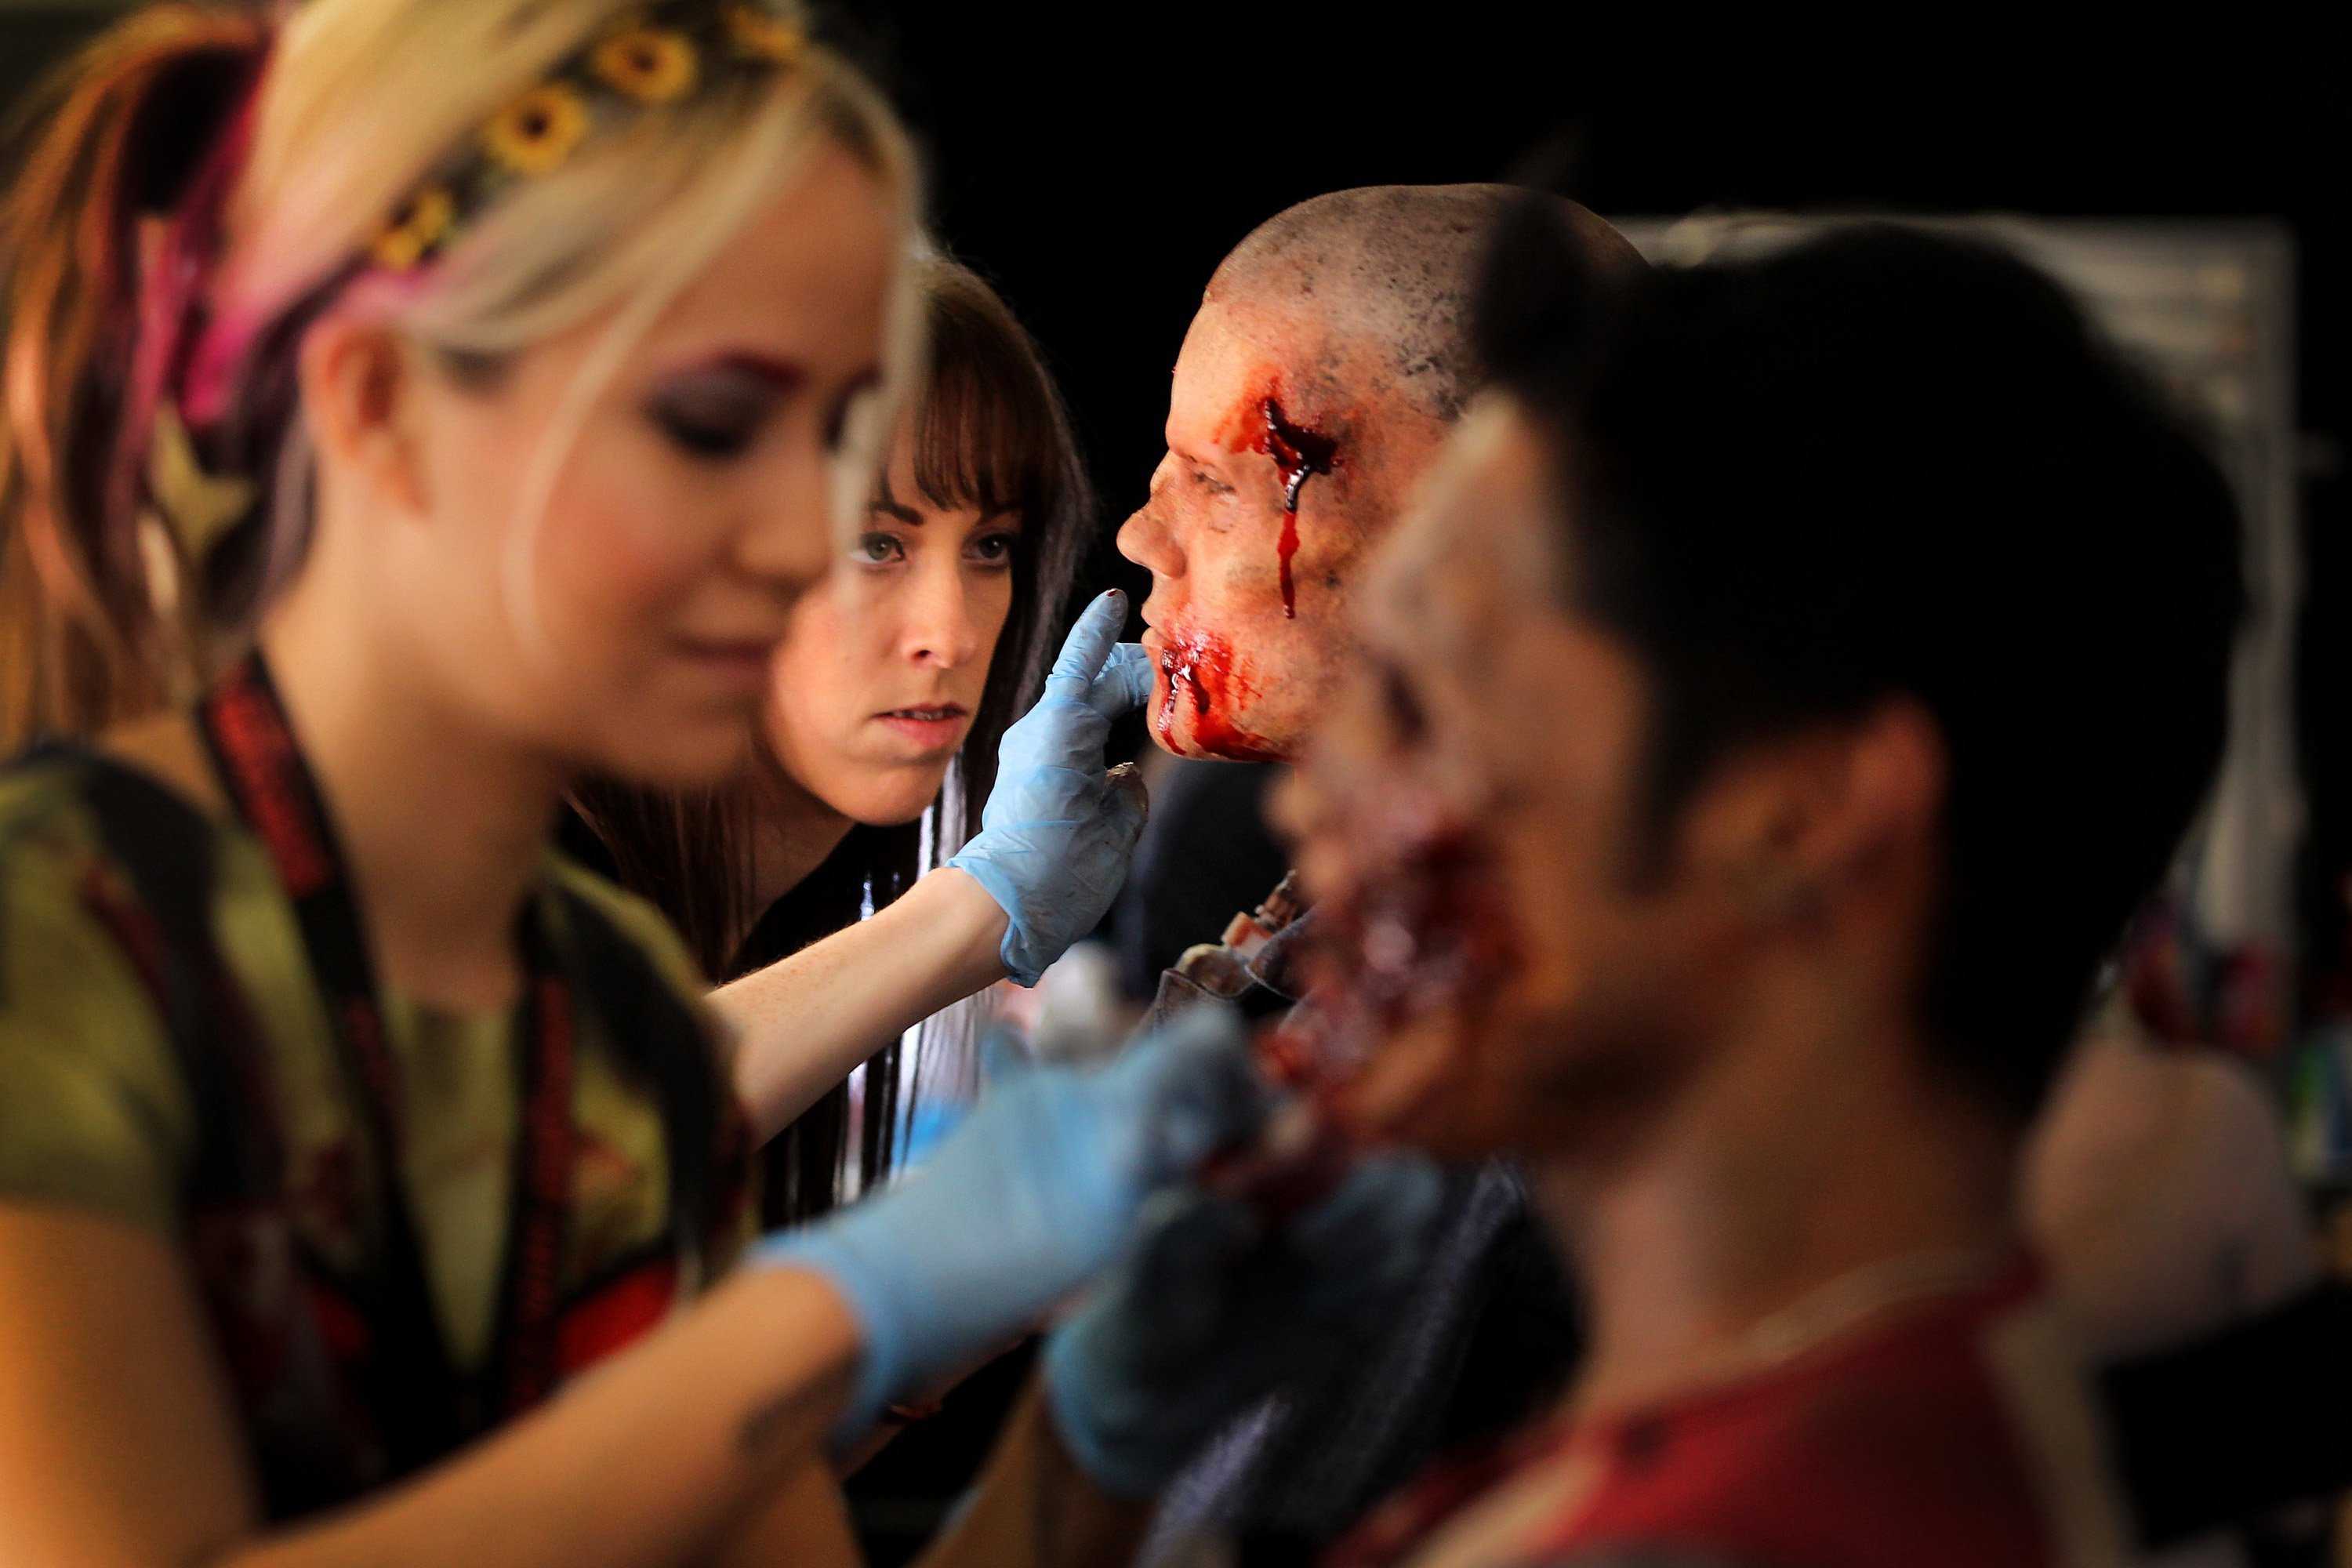 Bloody-looking makeup being applied to actors faces